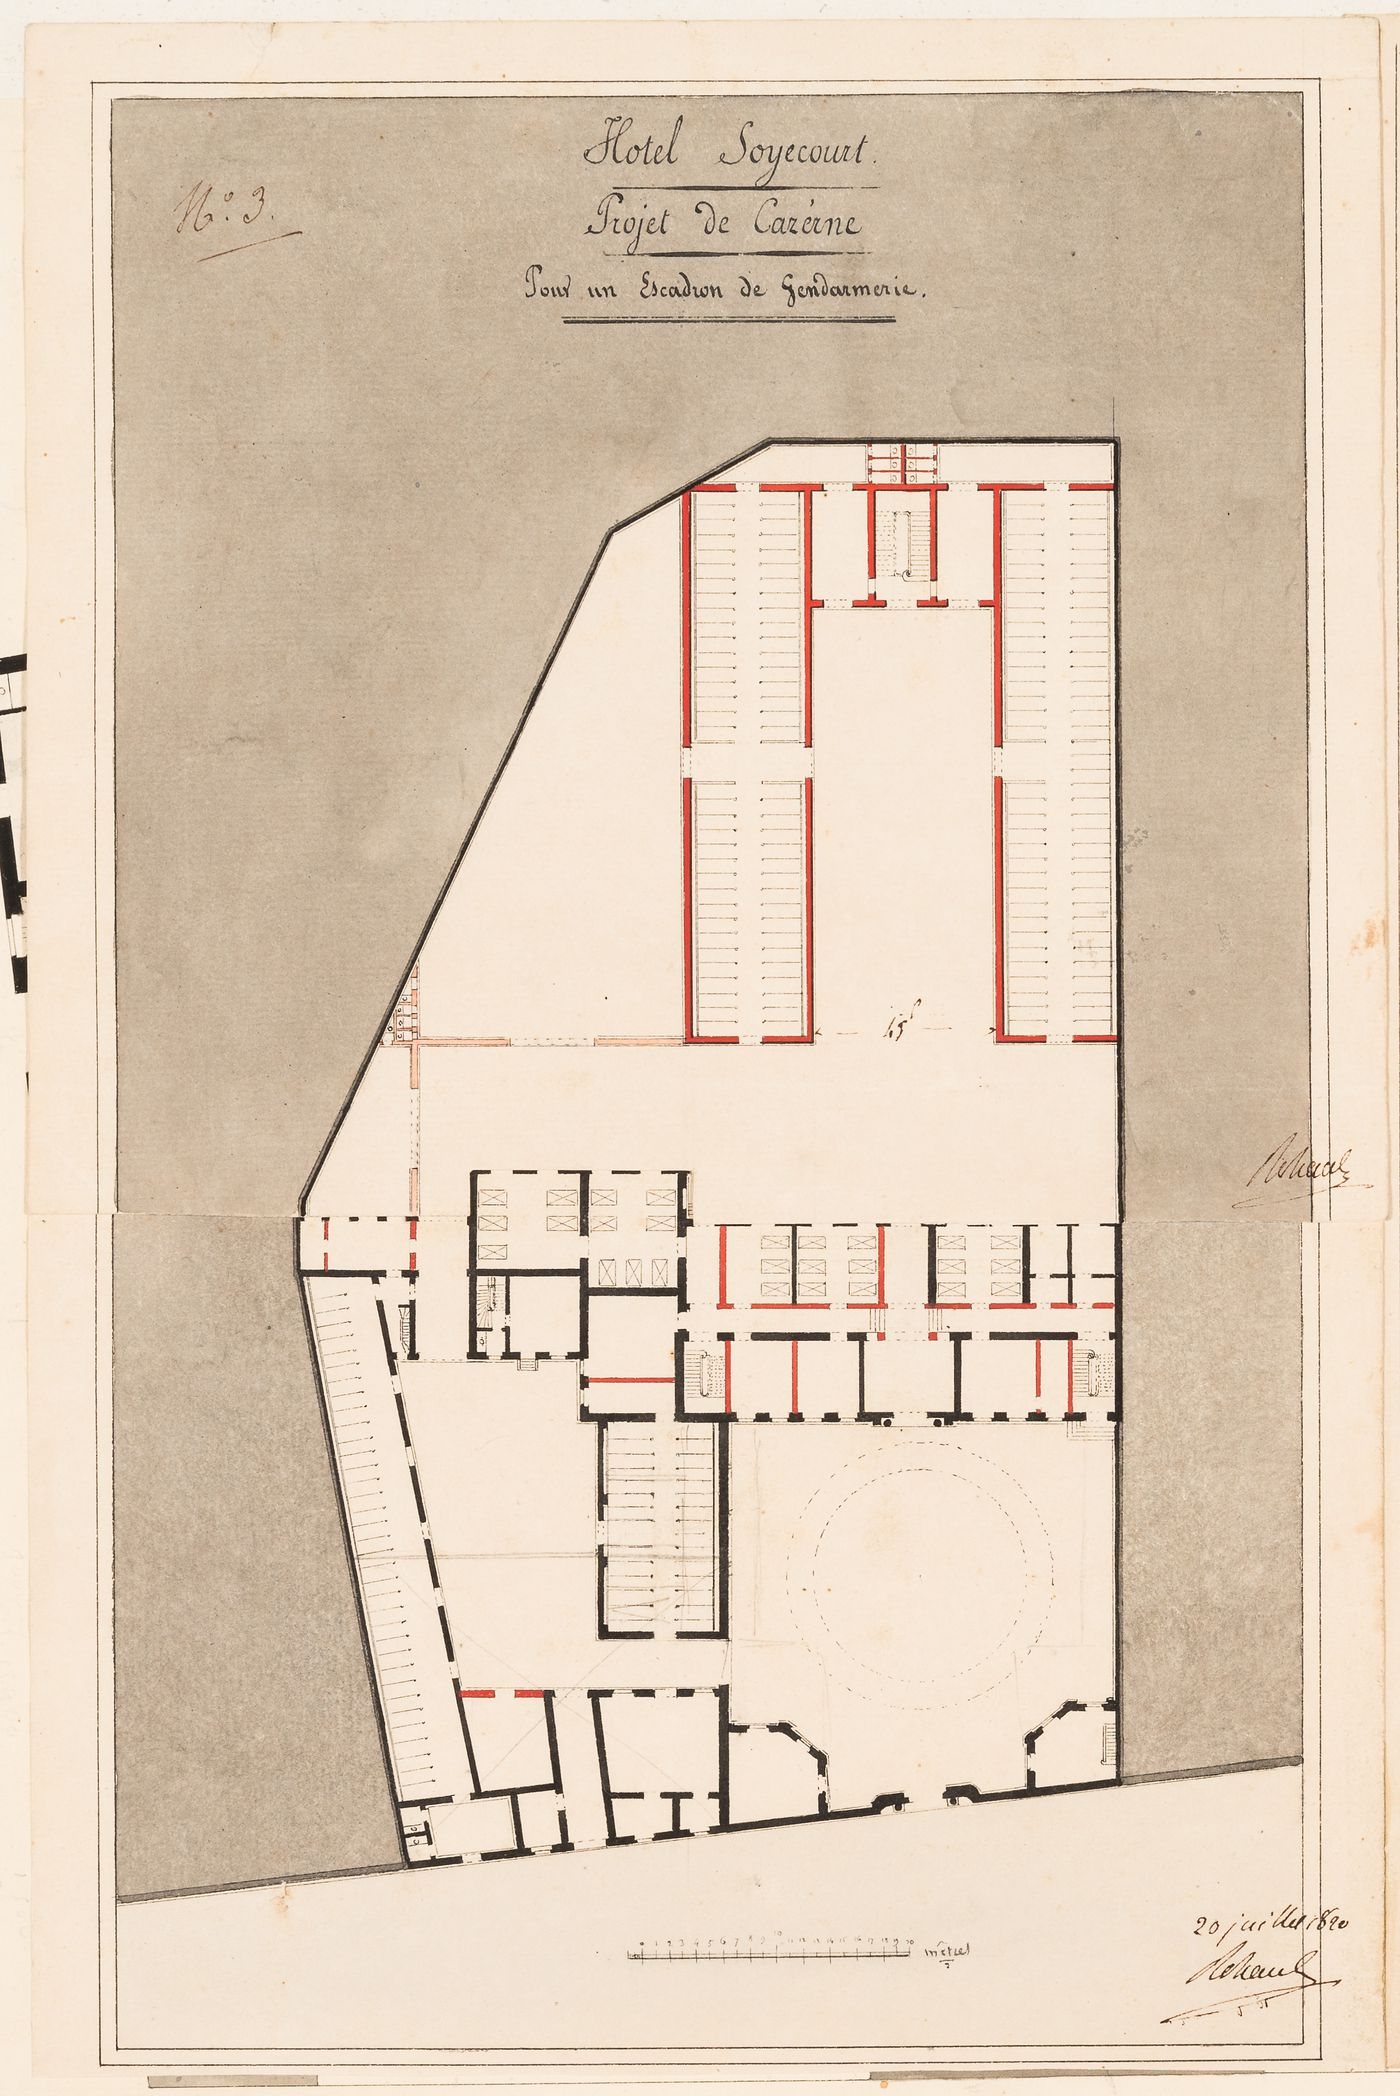 Project for the conversion of Hôtel Soyécourt, Paris, into barracks to house a squadron of gendarmes: Ground floor plan with an alternate design